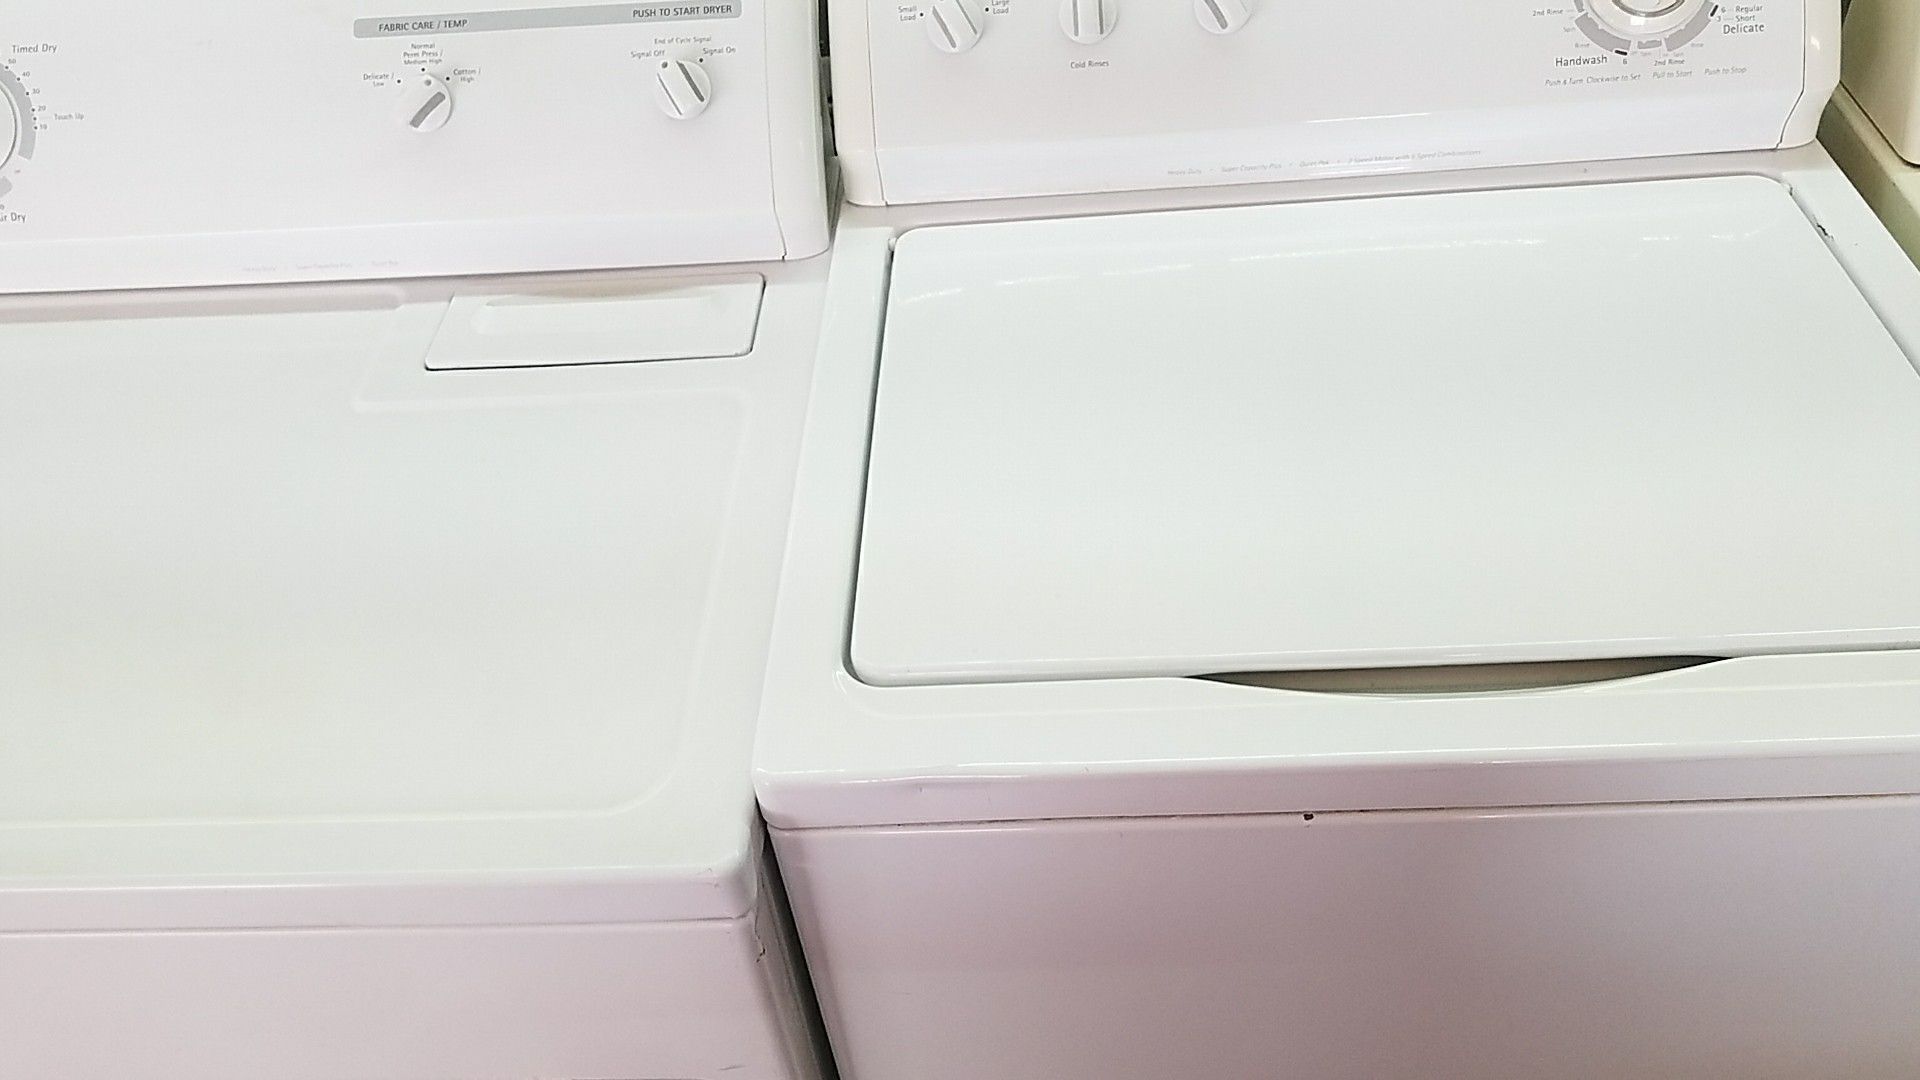 Washer and dryer set Kenmore electric dryer